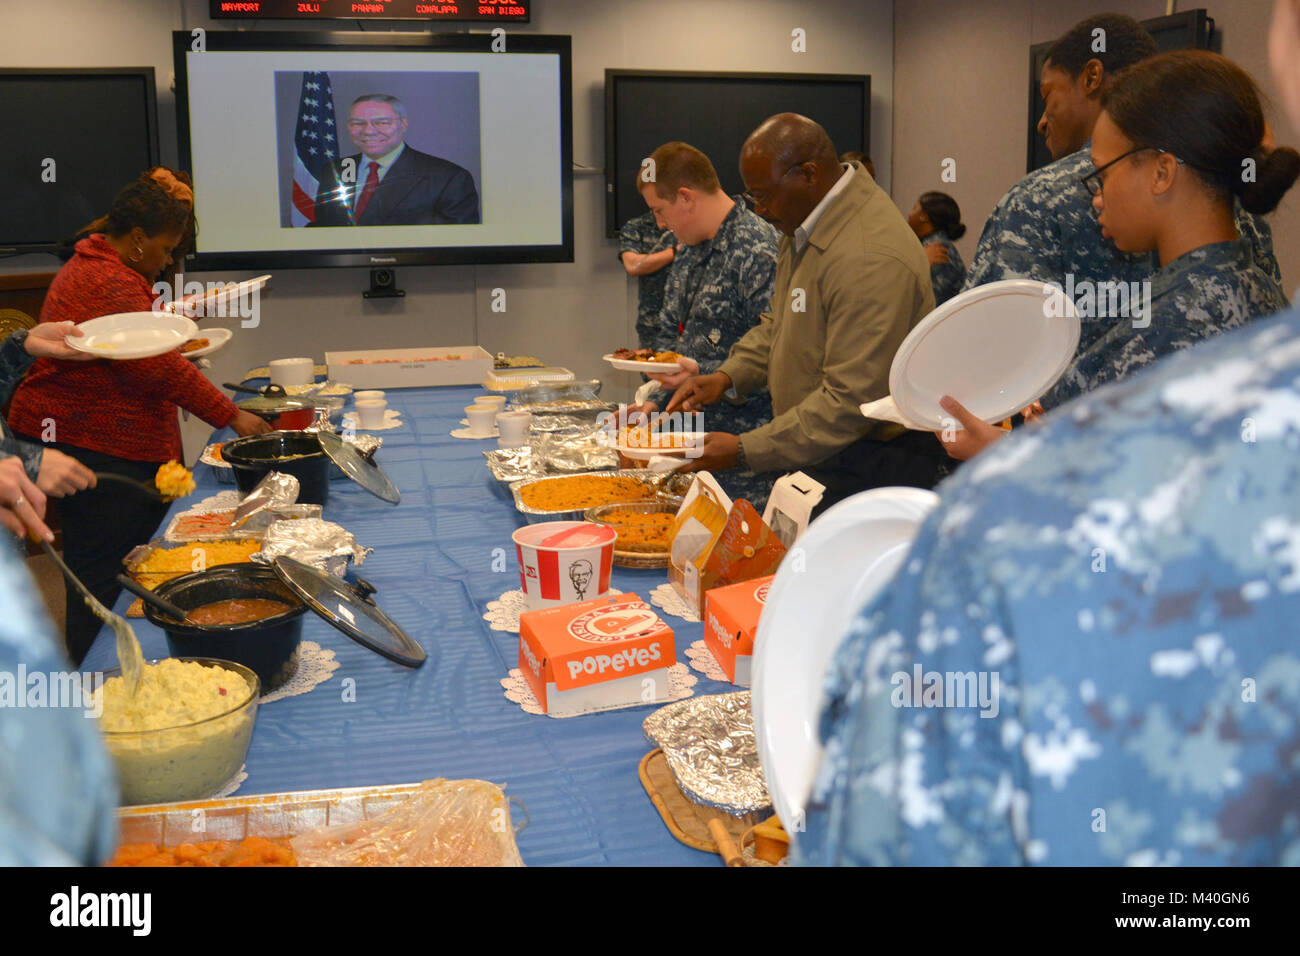 MAYPORT, Fla. (Feb. 25, 2015) – Members of U.S. Naval Forces Southern Command and U.S. 4th Fleet celebrate Black History Month by participating in an annual luncheon presented by members of the 4th Fleet White Hat Association. The event recognized members of the African-American community who made significant contributions to the United States Navy and the country. Sailors spoke about the accomplishments and impact African-Americans such as Gen. Colin Powell, Harriet Tubman, and Adm. Michelle Howard have made and inspired young attendees to continue the history of positive influence in the cou Stock Photo